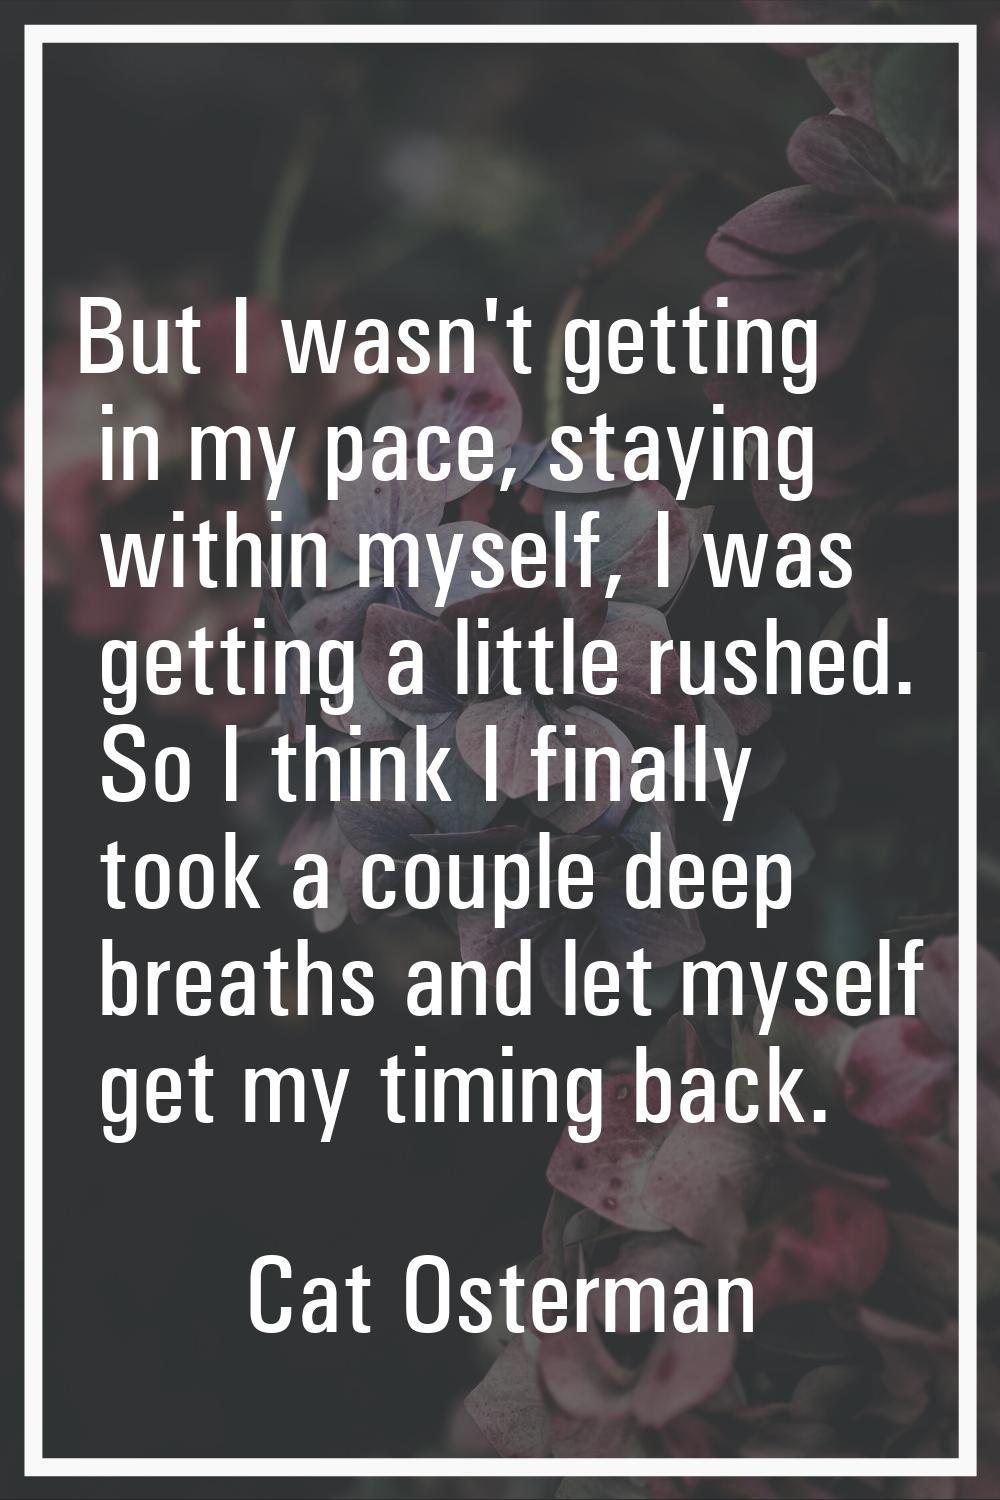 But I wasn't getting in my pace, staying within myself, I was getting a little rushed. So I think I